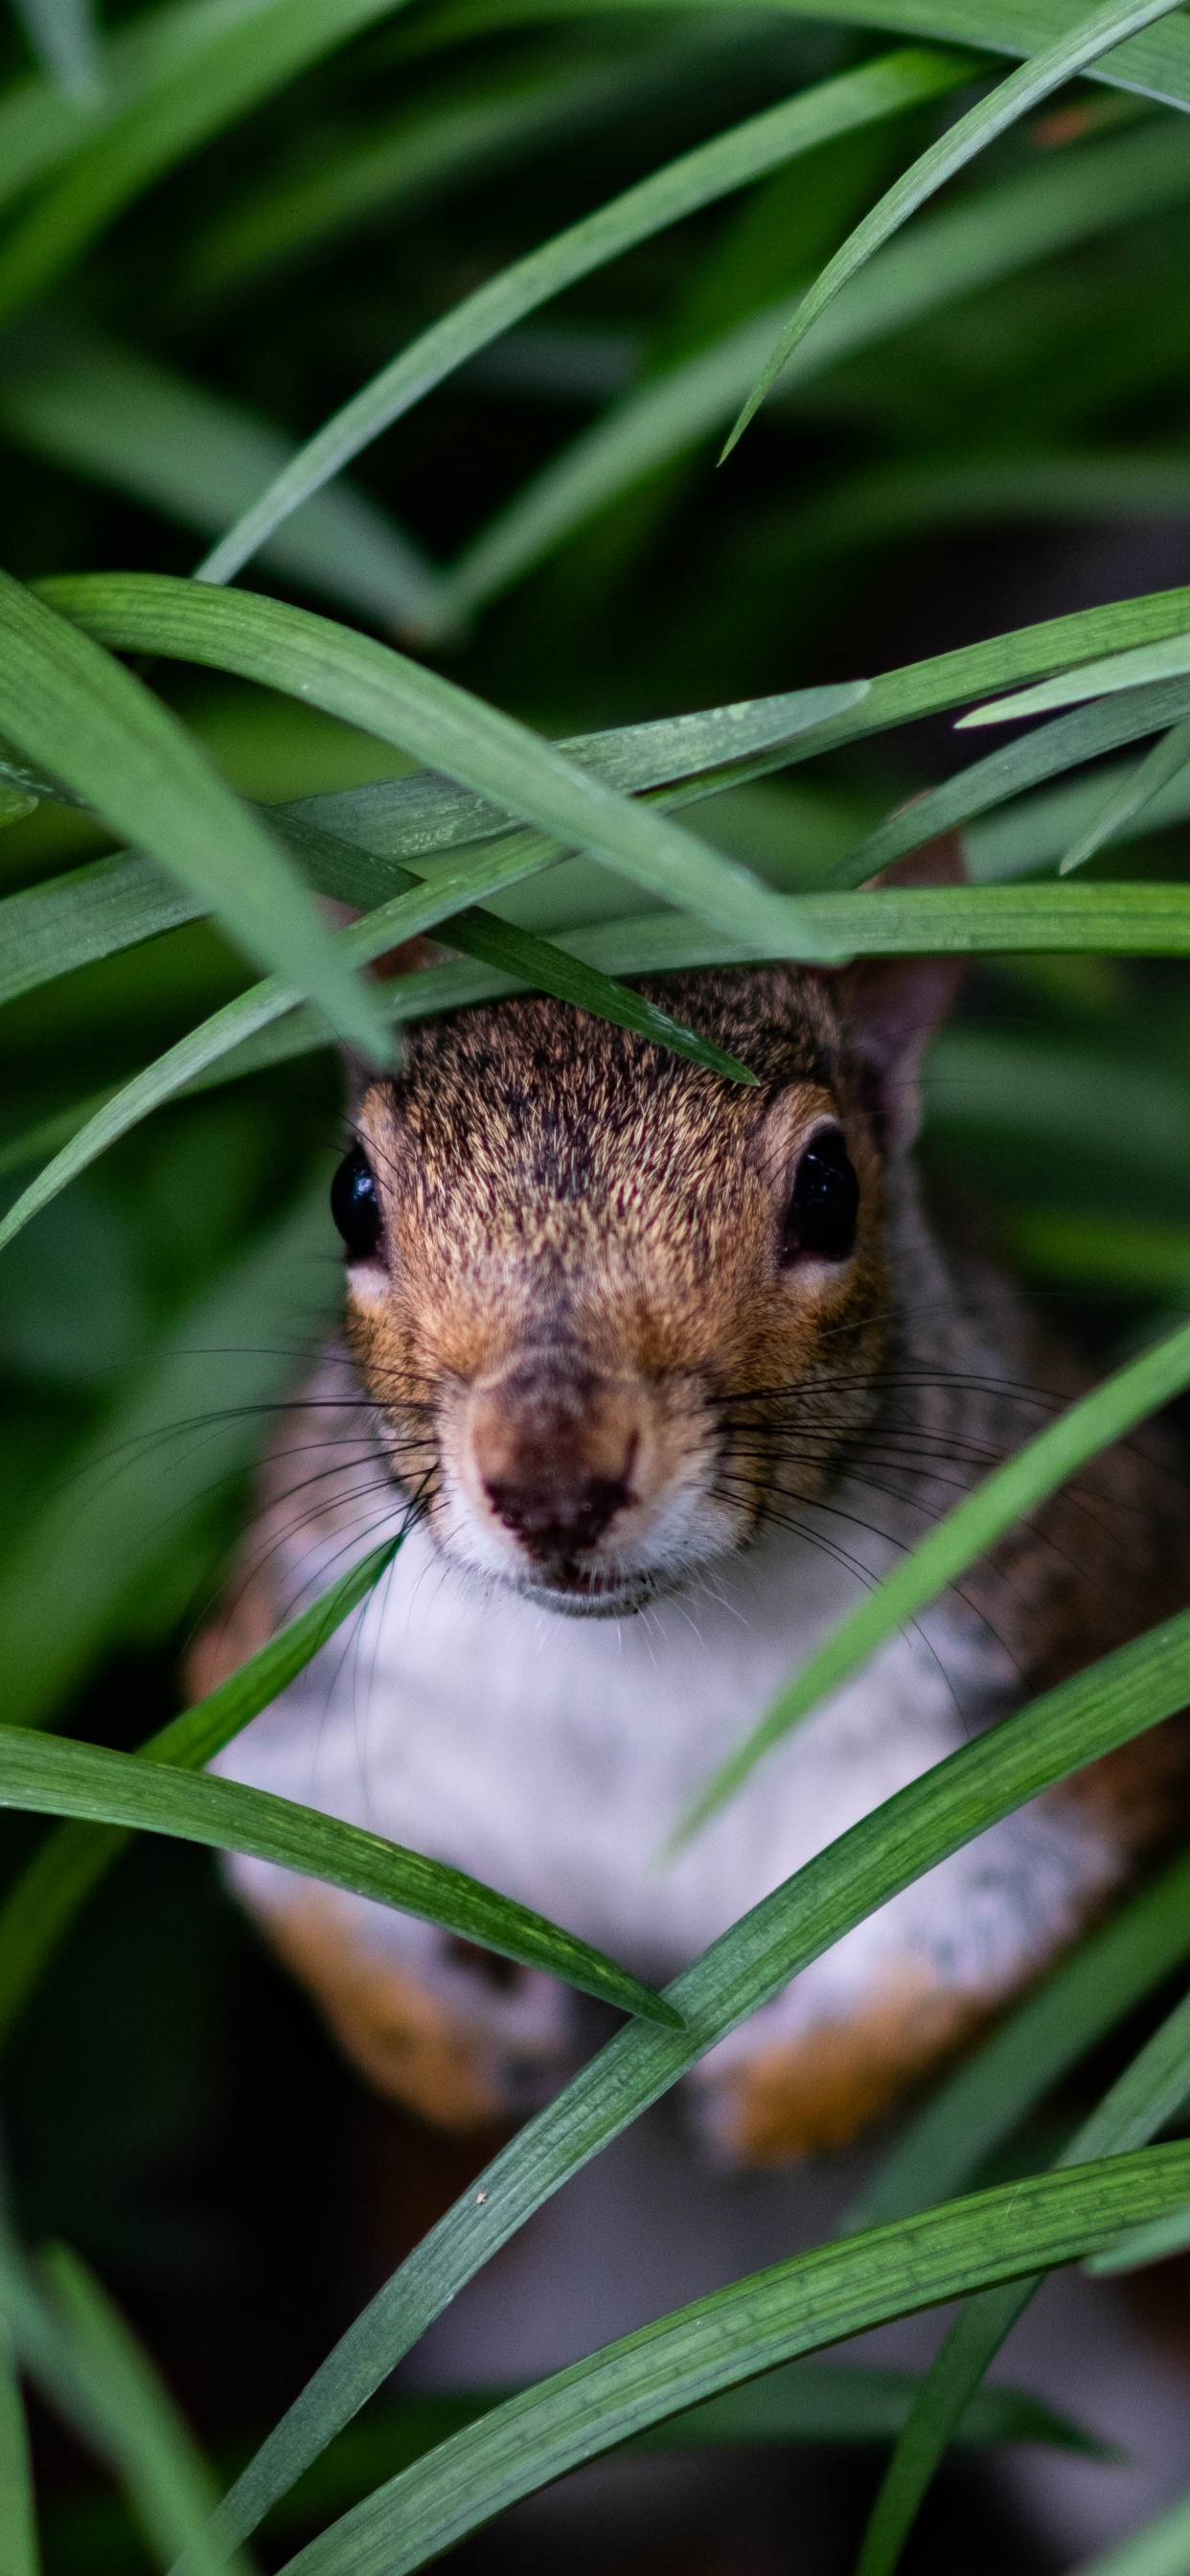 Brown and White Squirrel on Green Grass During Daytime. Wallpaper in 1242x2688 Resolution